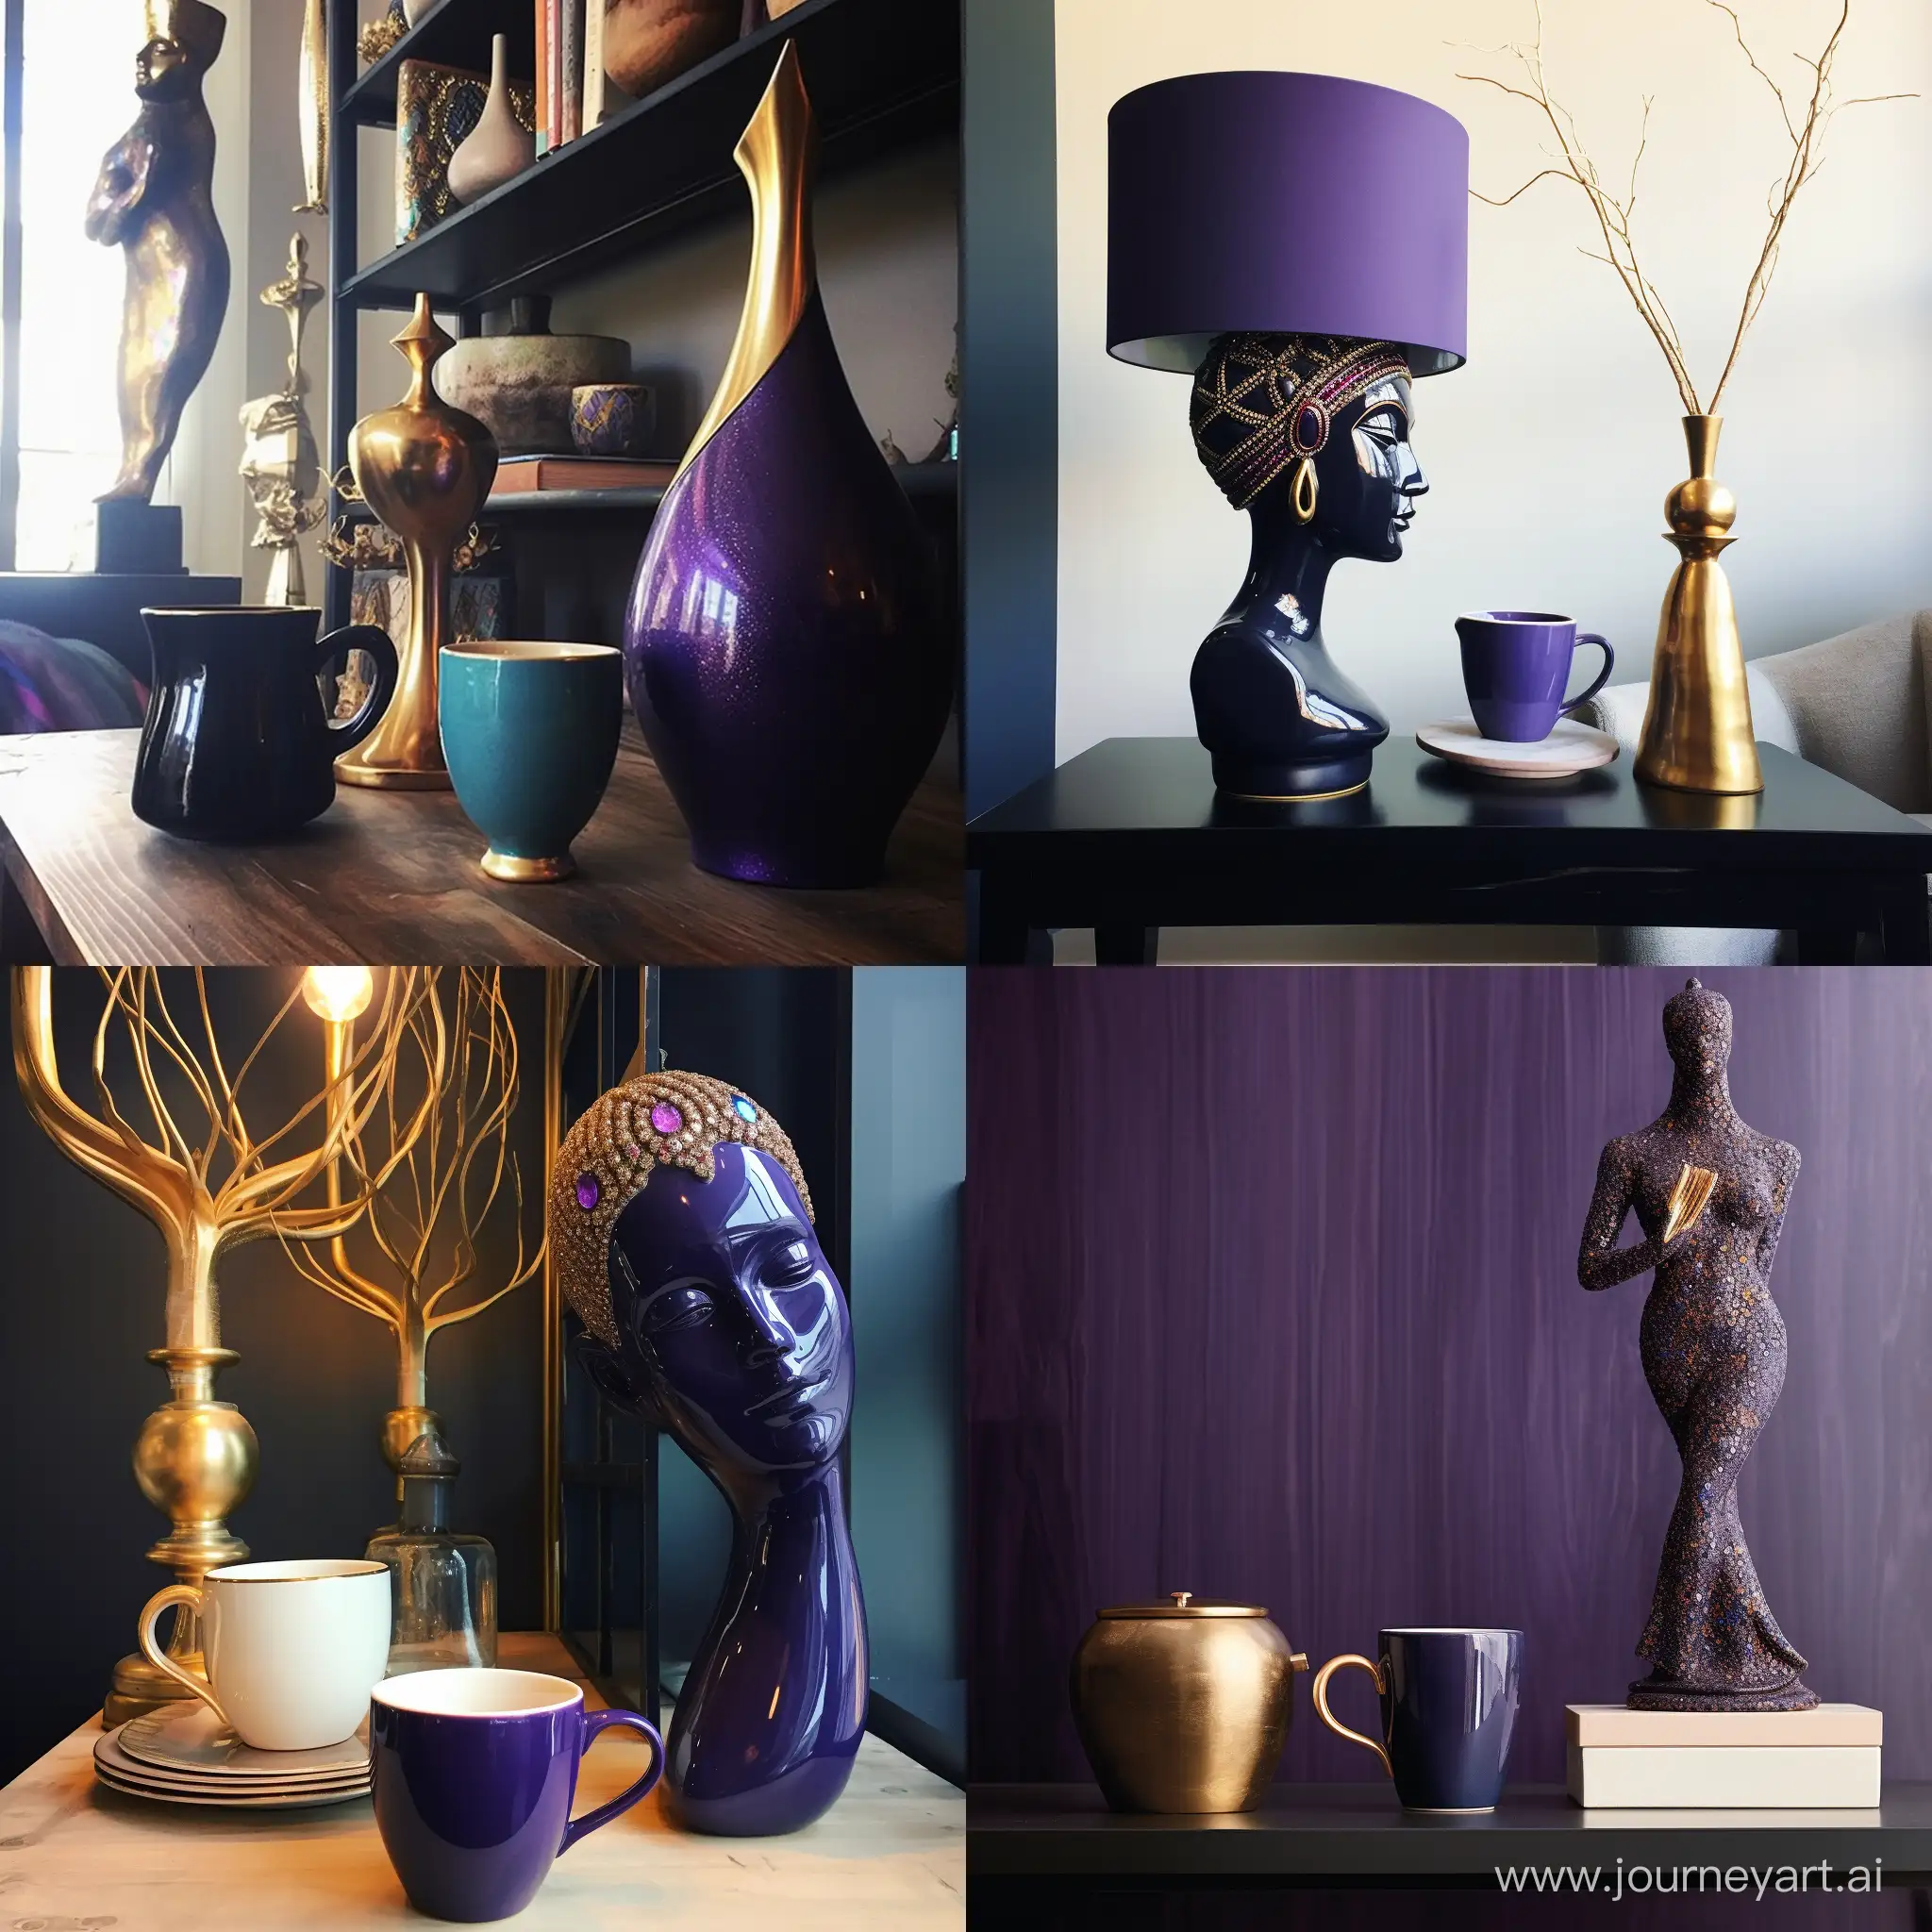 /imagine a sleek friendly lamp genie emerging from a human-shaped mug, but magical. Add subtle sparkles for enchantment. Use jewel tones (deep purples, blues, gold). Keep it clean, scalable, and modern.